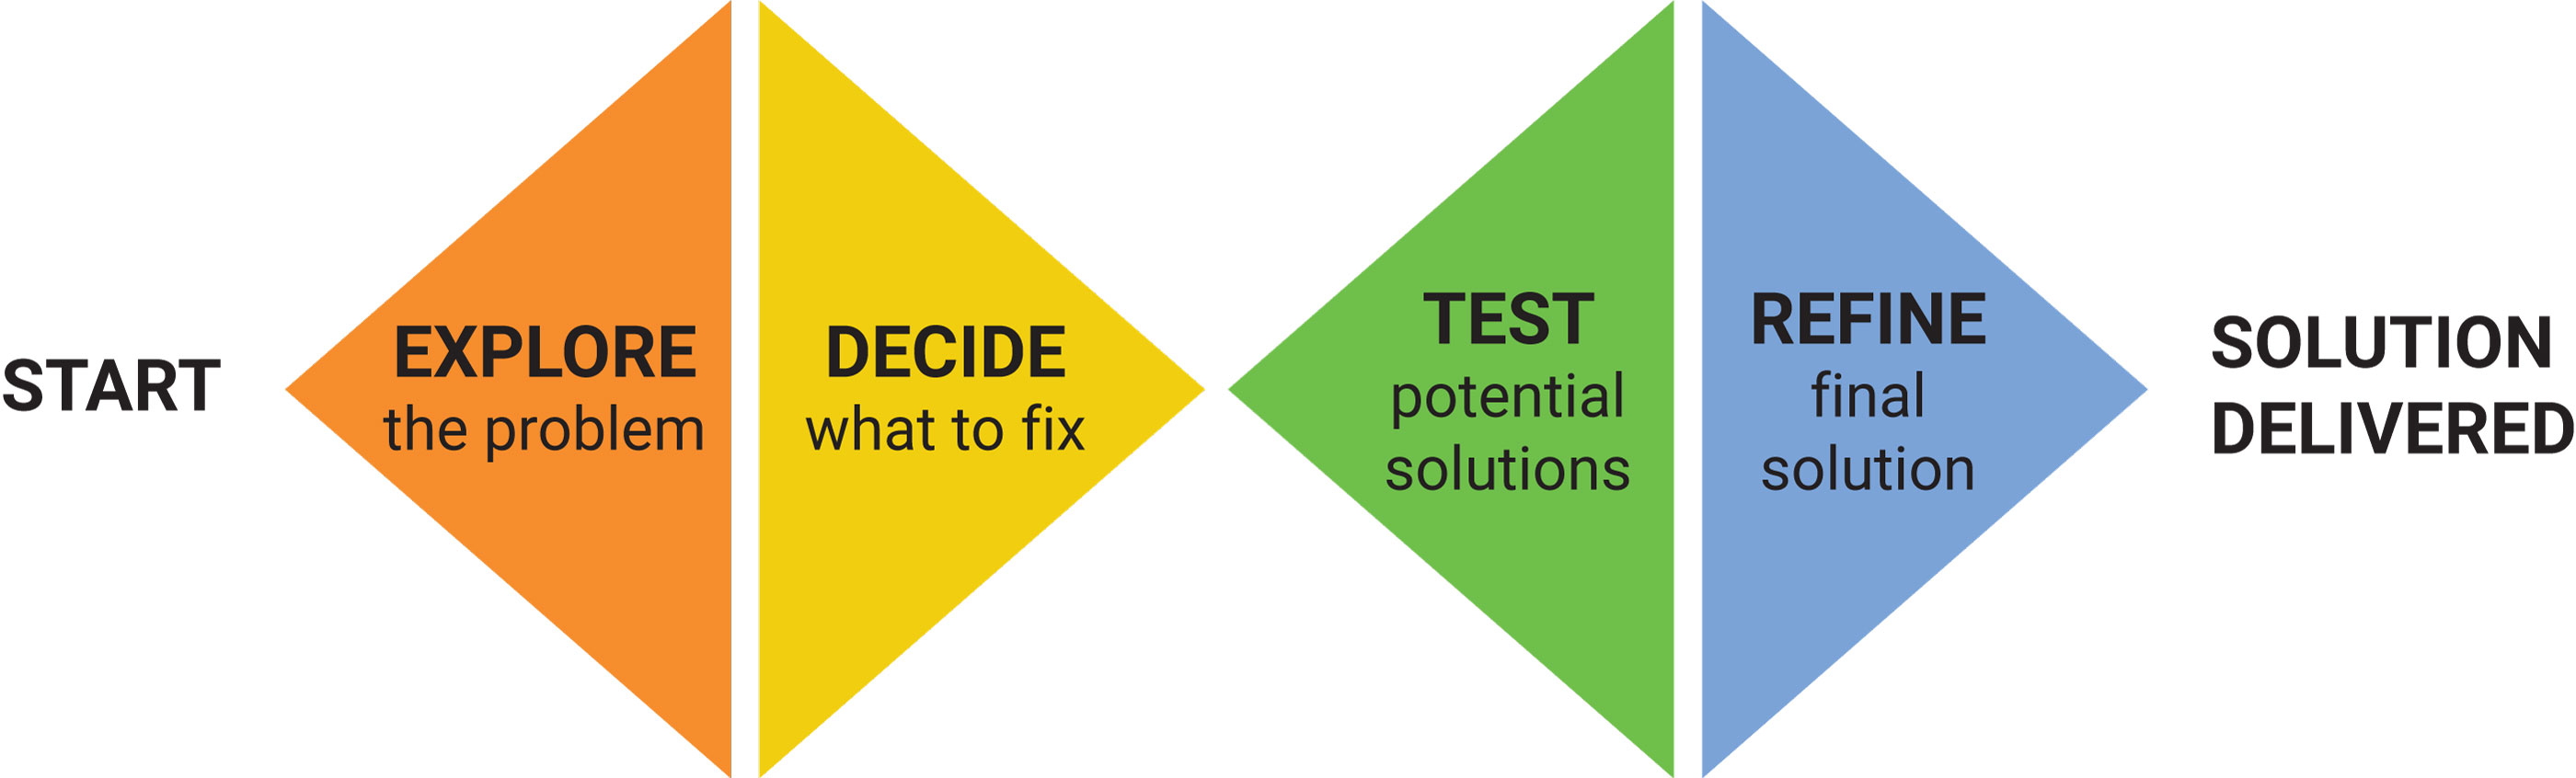 Diagram depicting the Double Diamond design thinking process: Start, Explore the problem, Decide what to fix, Test potential solutions, Refine final solution, Solution delivered